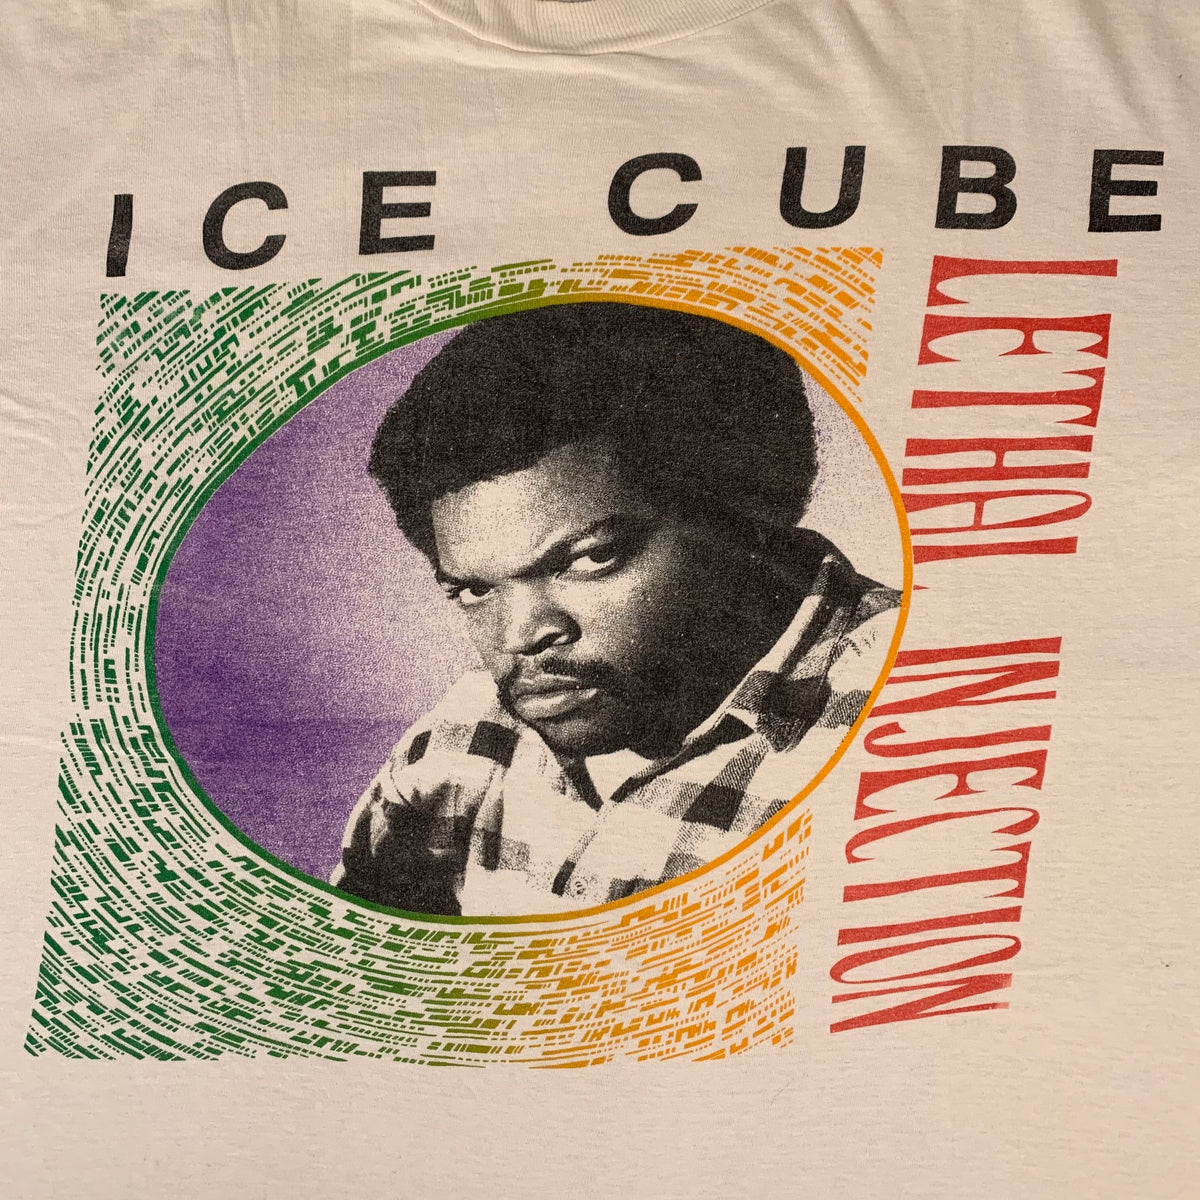 Vintage Ice Cube &quot;Lethal Injection&quot; Multicolored T-Shirt